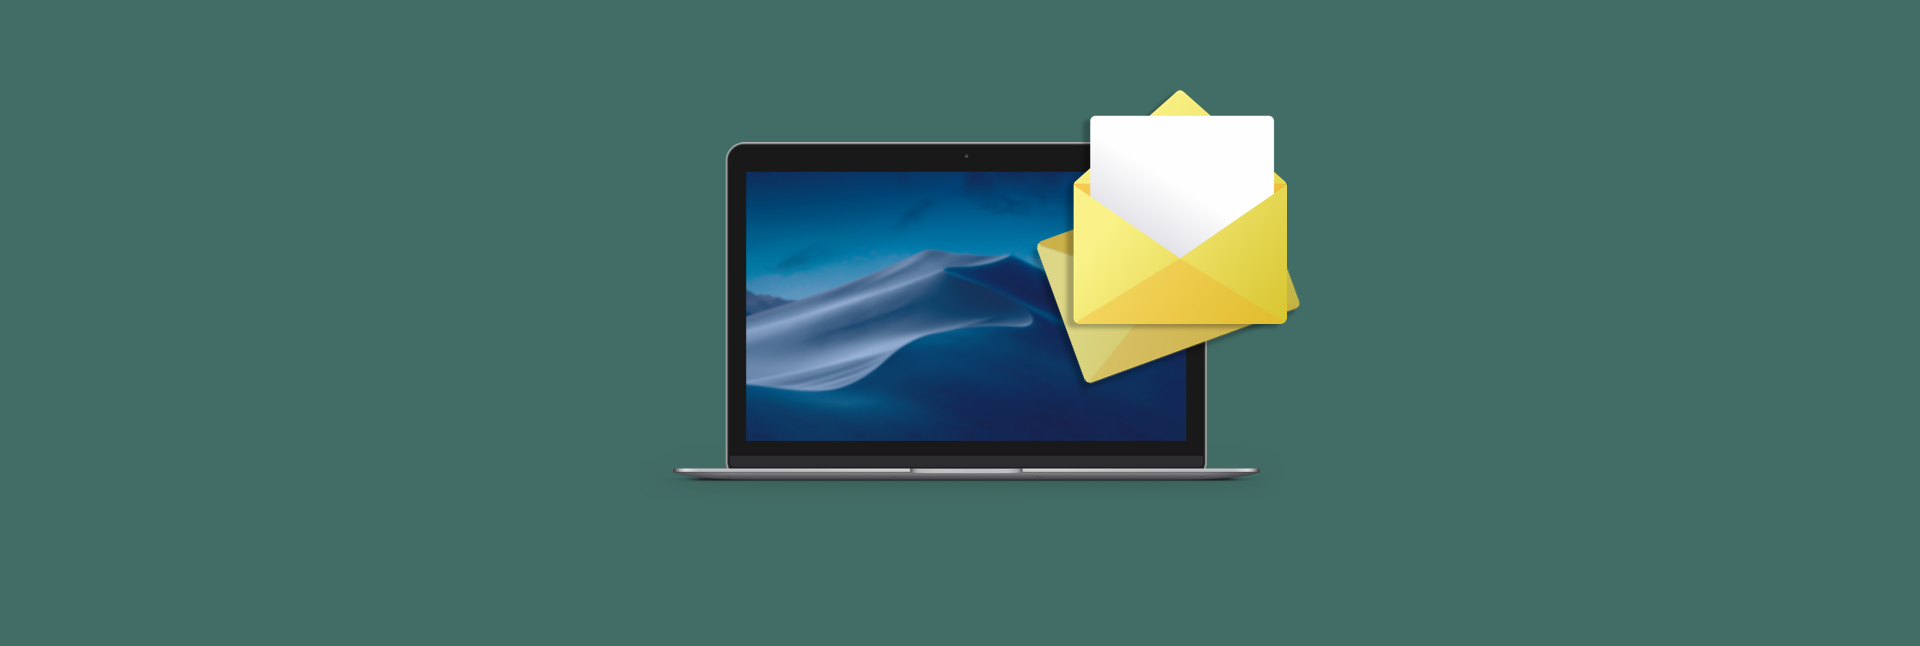 best gmail client for mac 2018